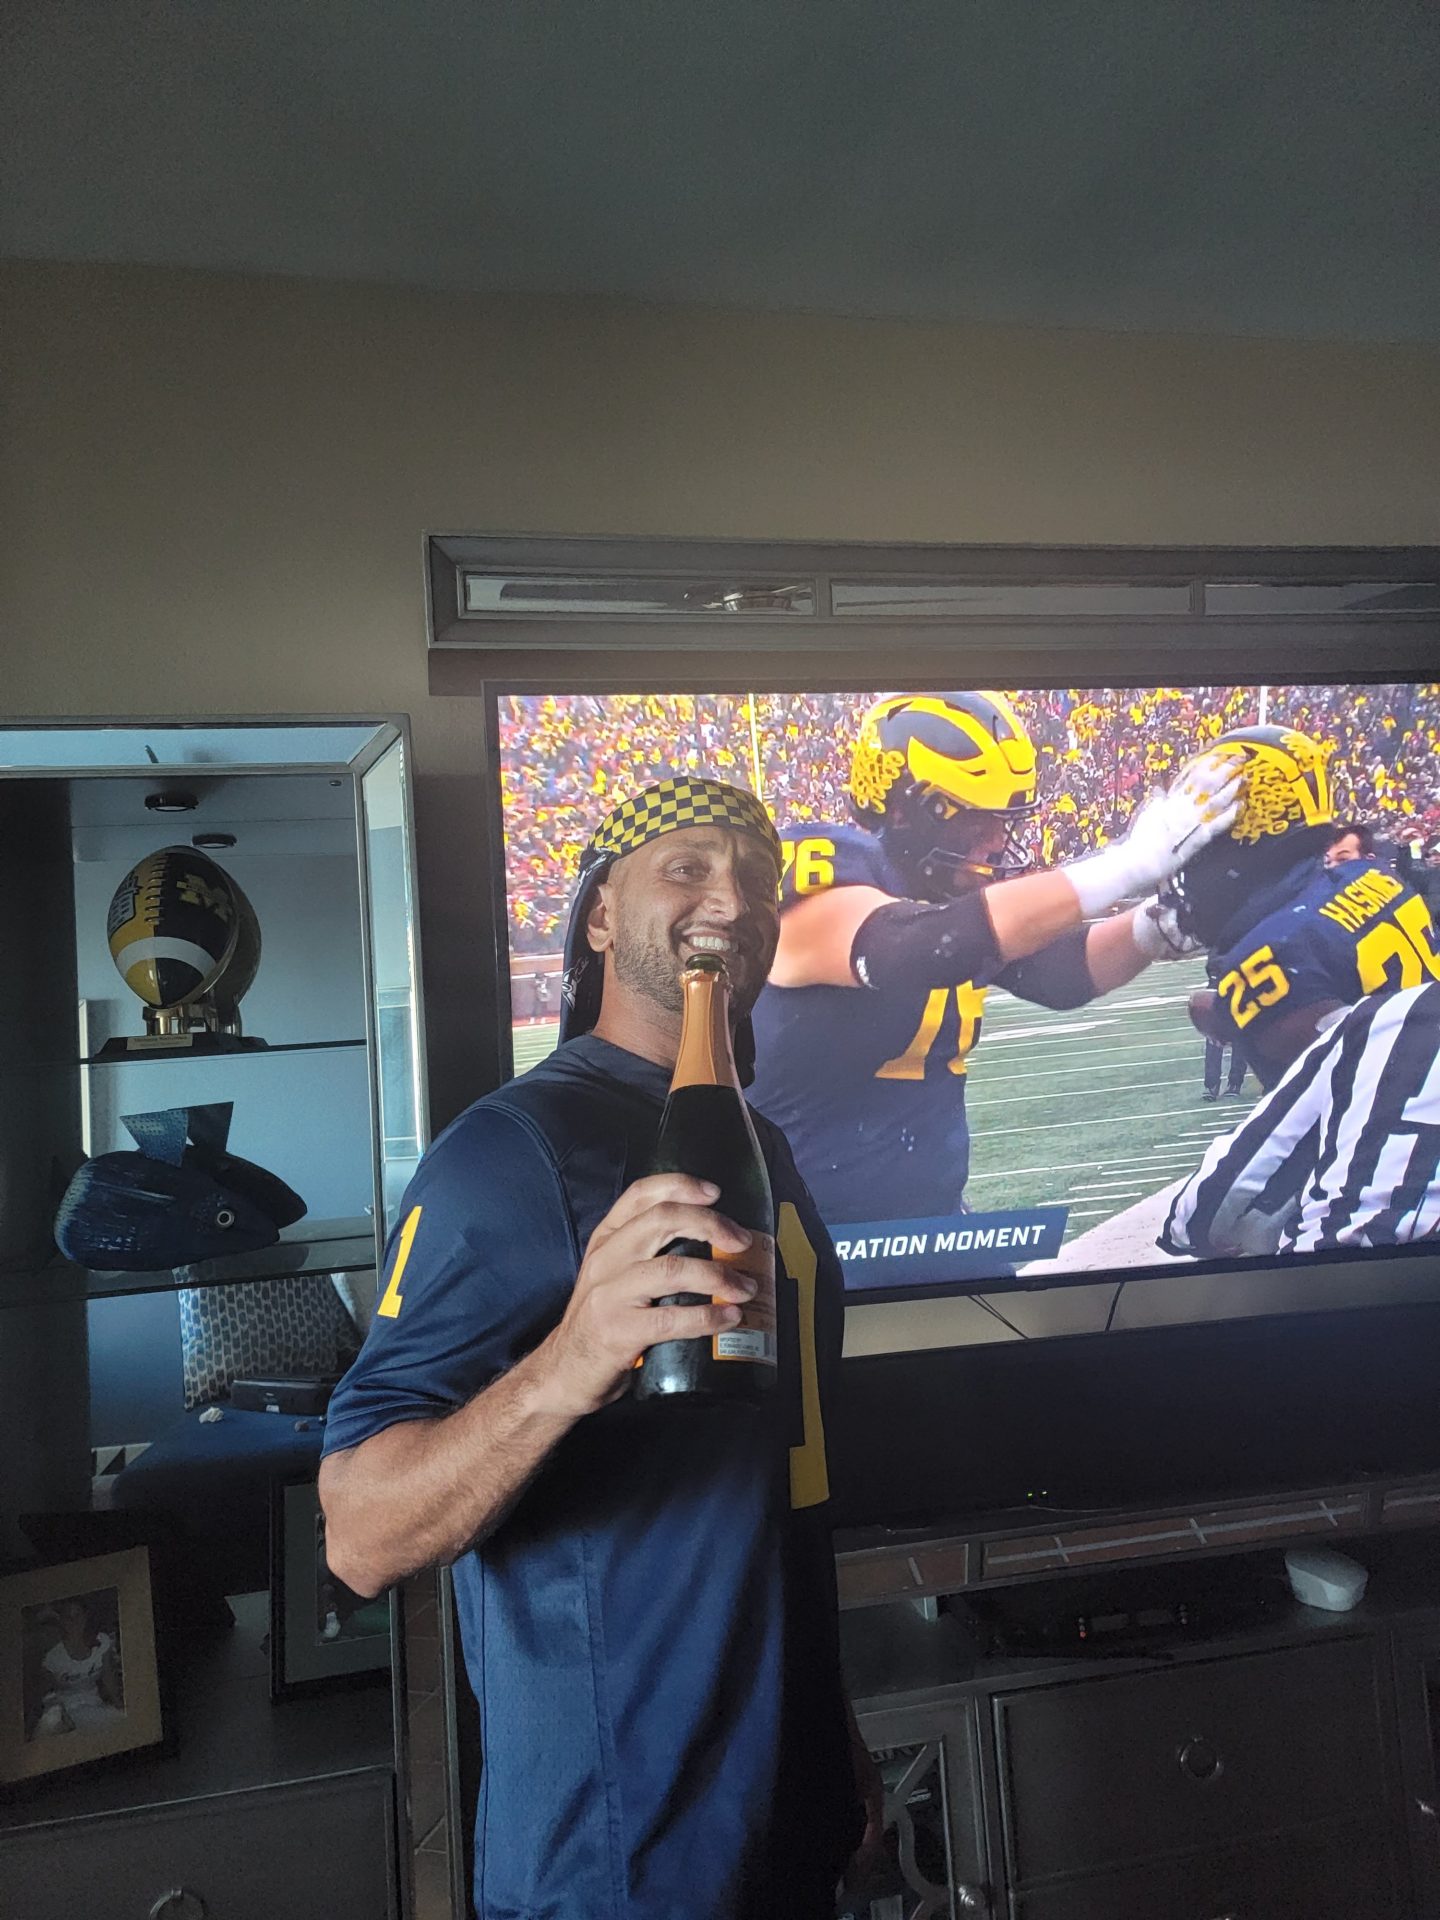 a man holding a bottle of champagne in front of a television